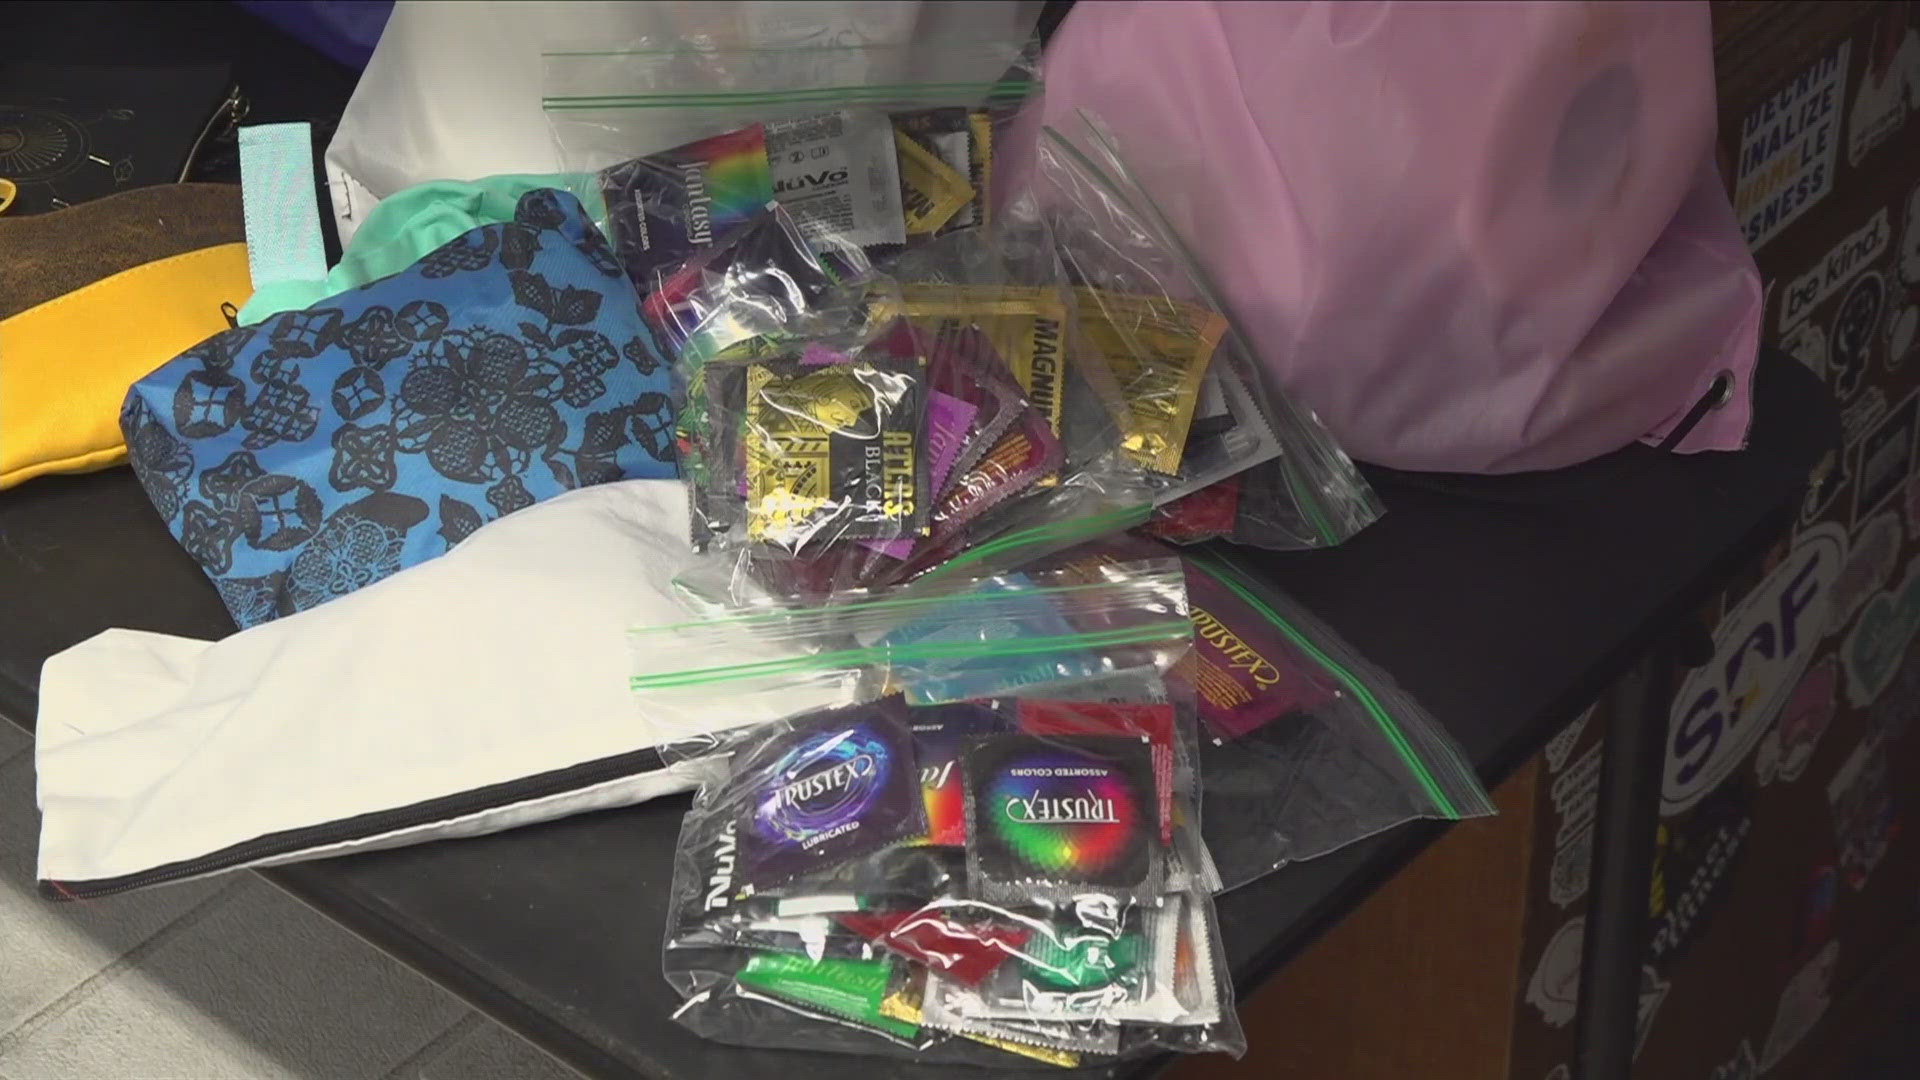 Whitney Fullerton founded the Love Project. Every Thursday, she passes out free bags of condoms to anyone who needs them.